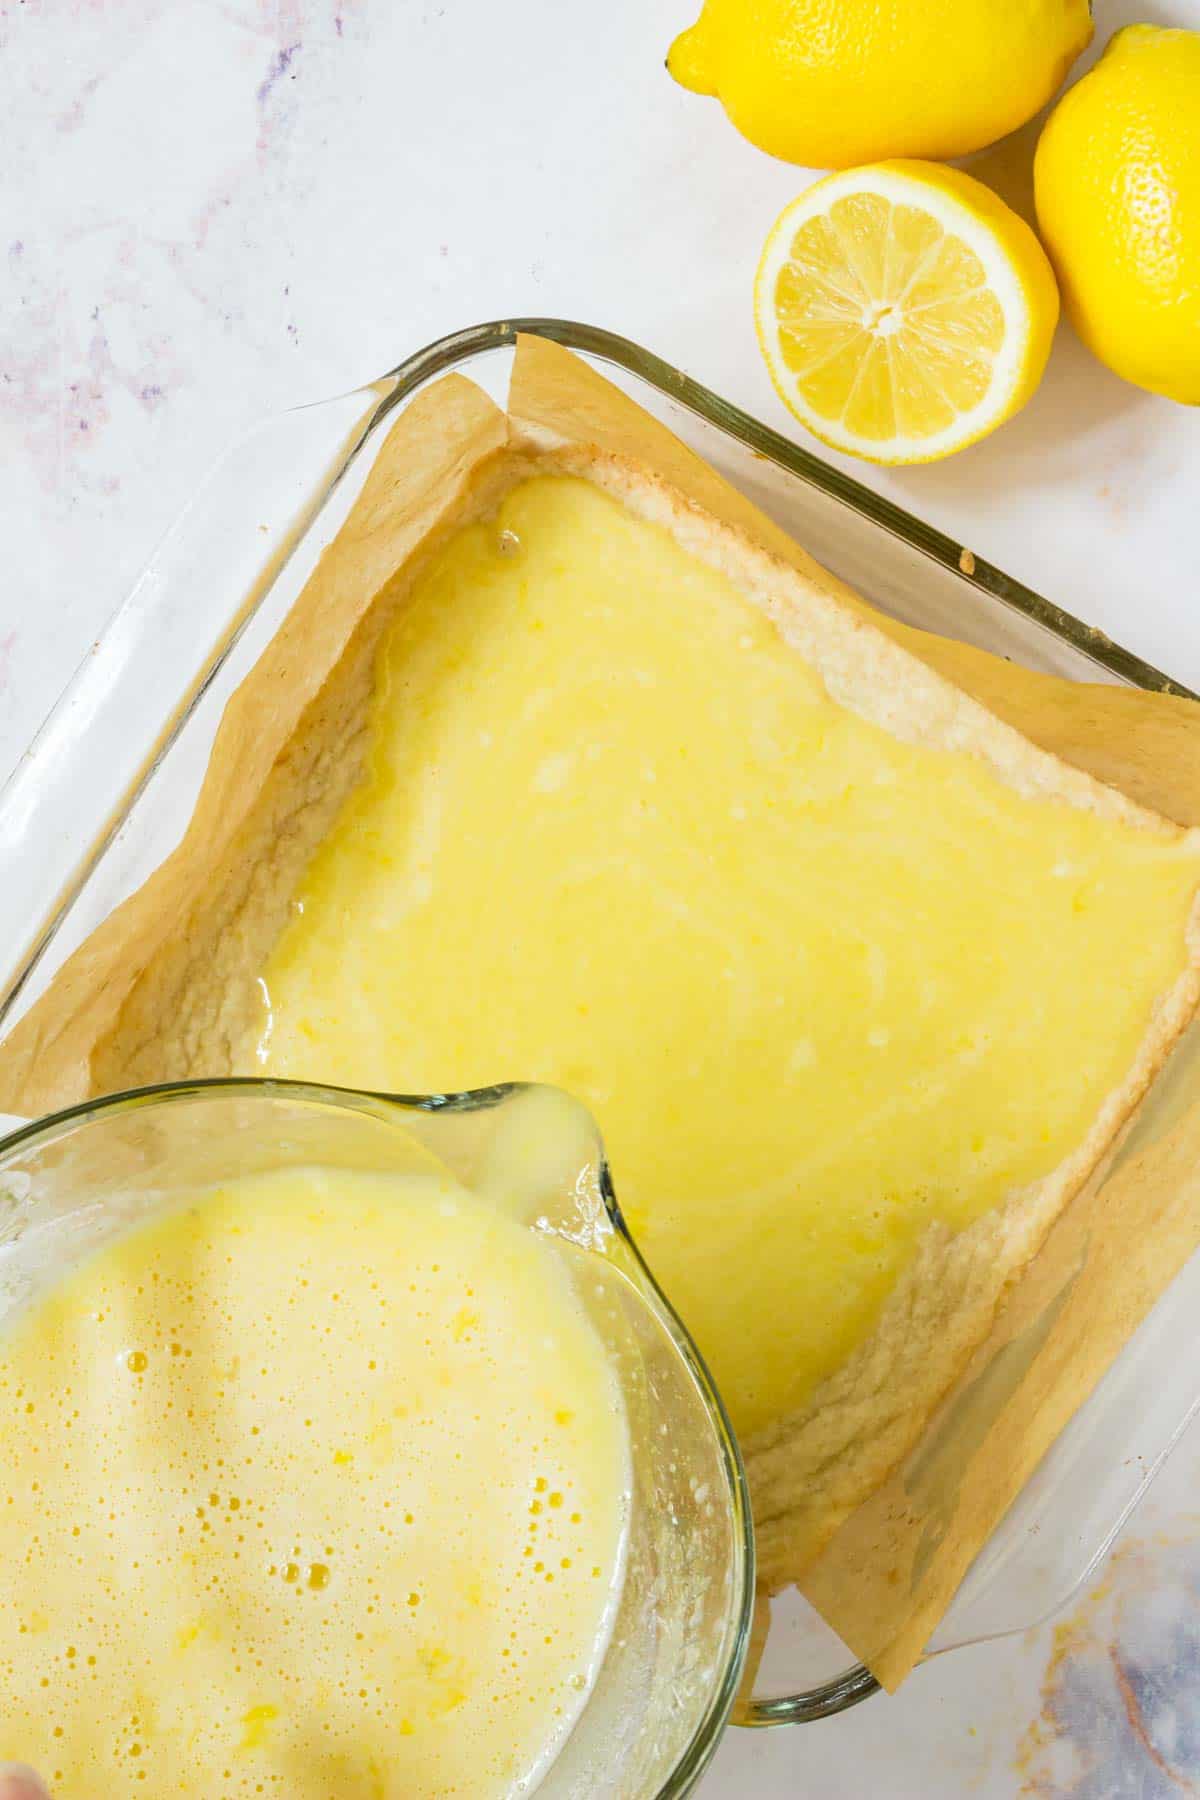 Lemon filling is poured over the shortbread crust in a parchment-lined baking dish.